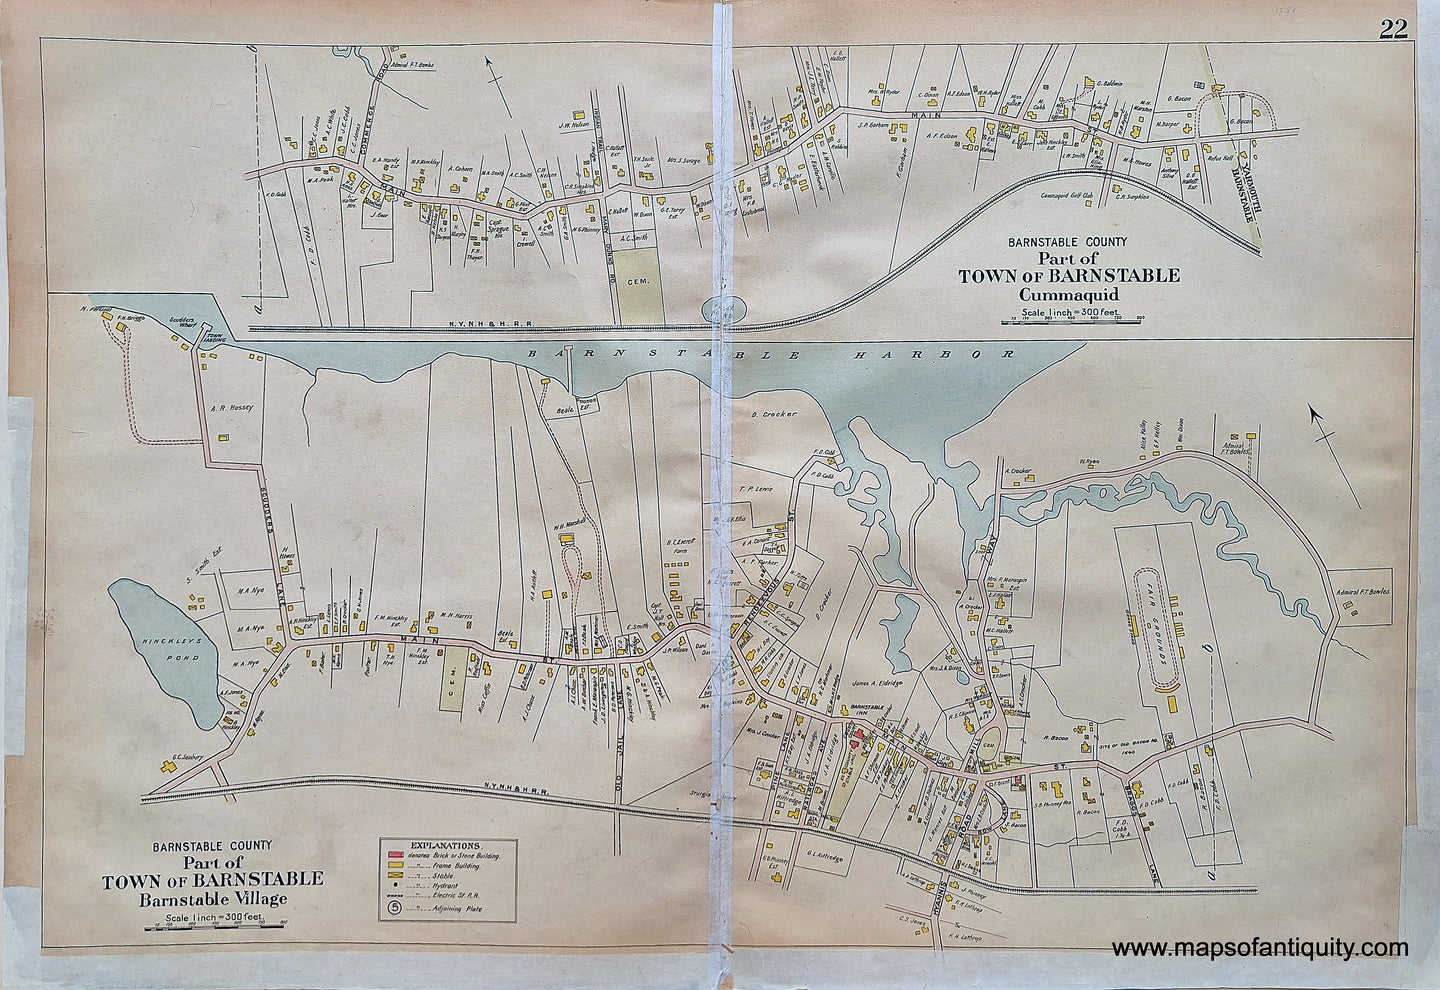 Antique-Hand-Colored-Map-Part-of-Town-of-Barnstable---Barnstable-Village-Cummaquid-Sheet-22-(MA)-Massachusetts-Cape-Cod-and-Islands-1906-Walker-Maps-Of-Antiquity